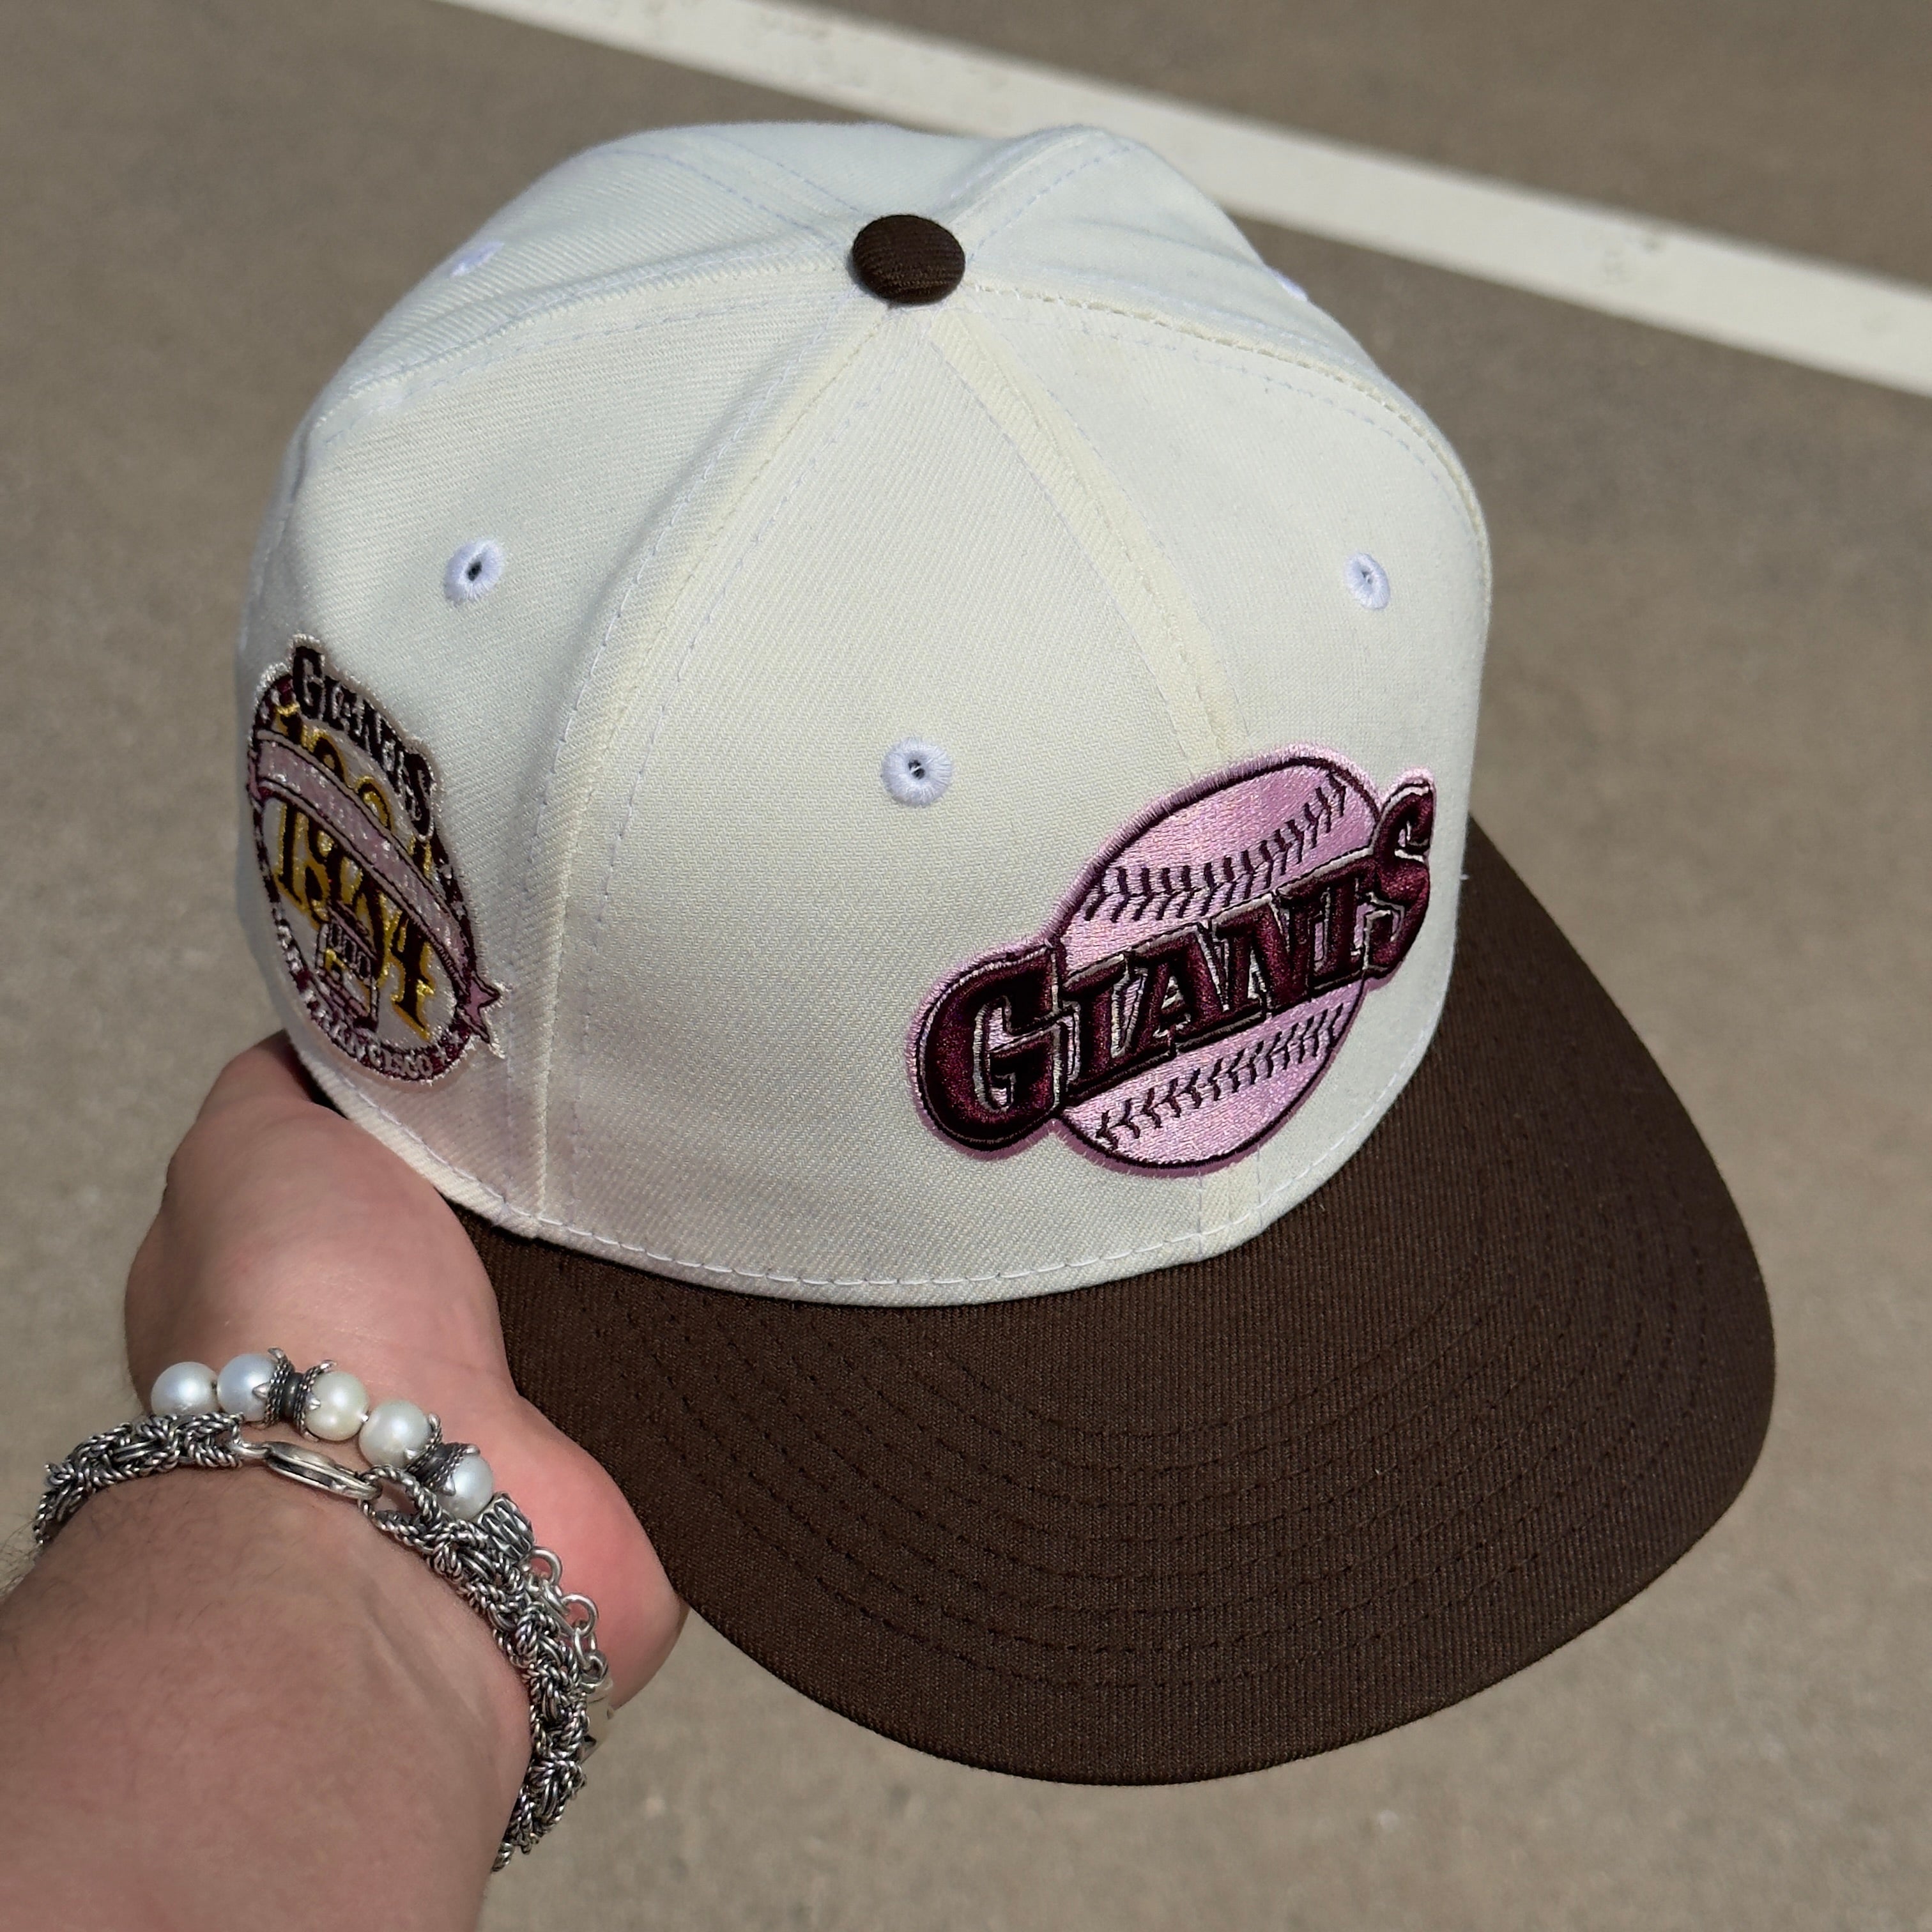 1/8 USED Chrome San Francisco Giants All Star Game 59fifty New Era Fitted Hat Cap